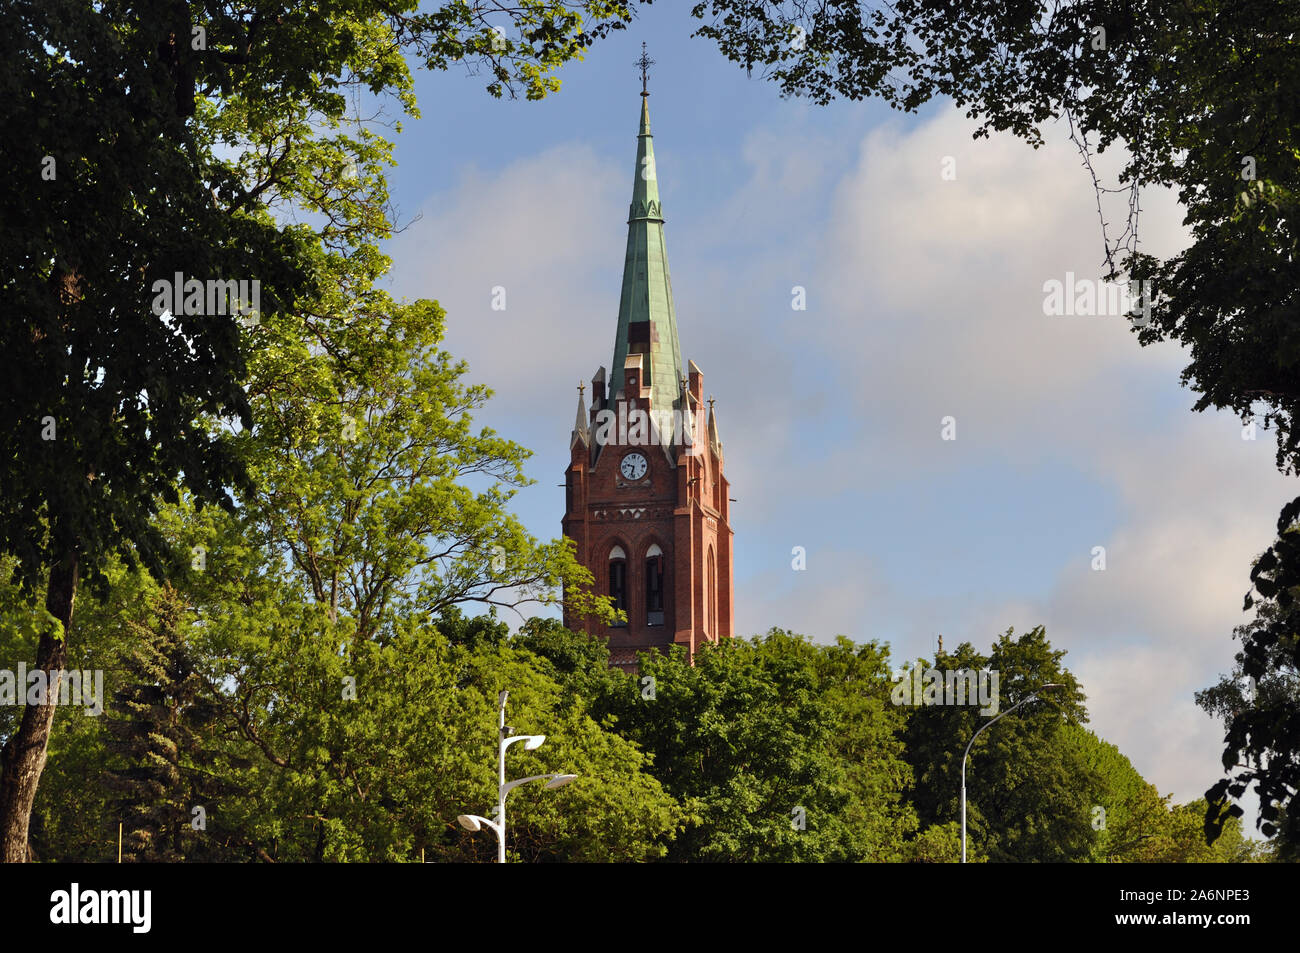 A tall church steeple in historic Latvia, Lithuania Stock Photo